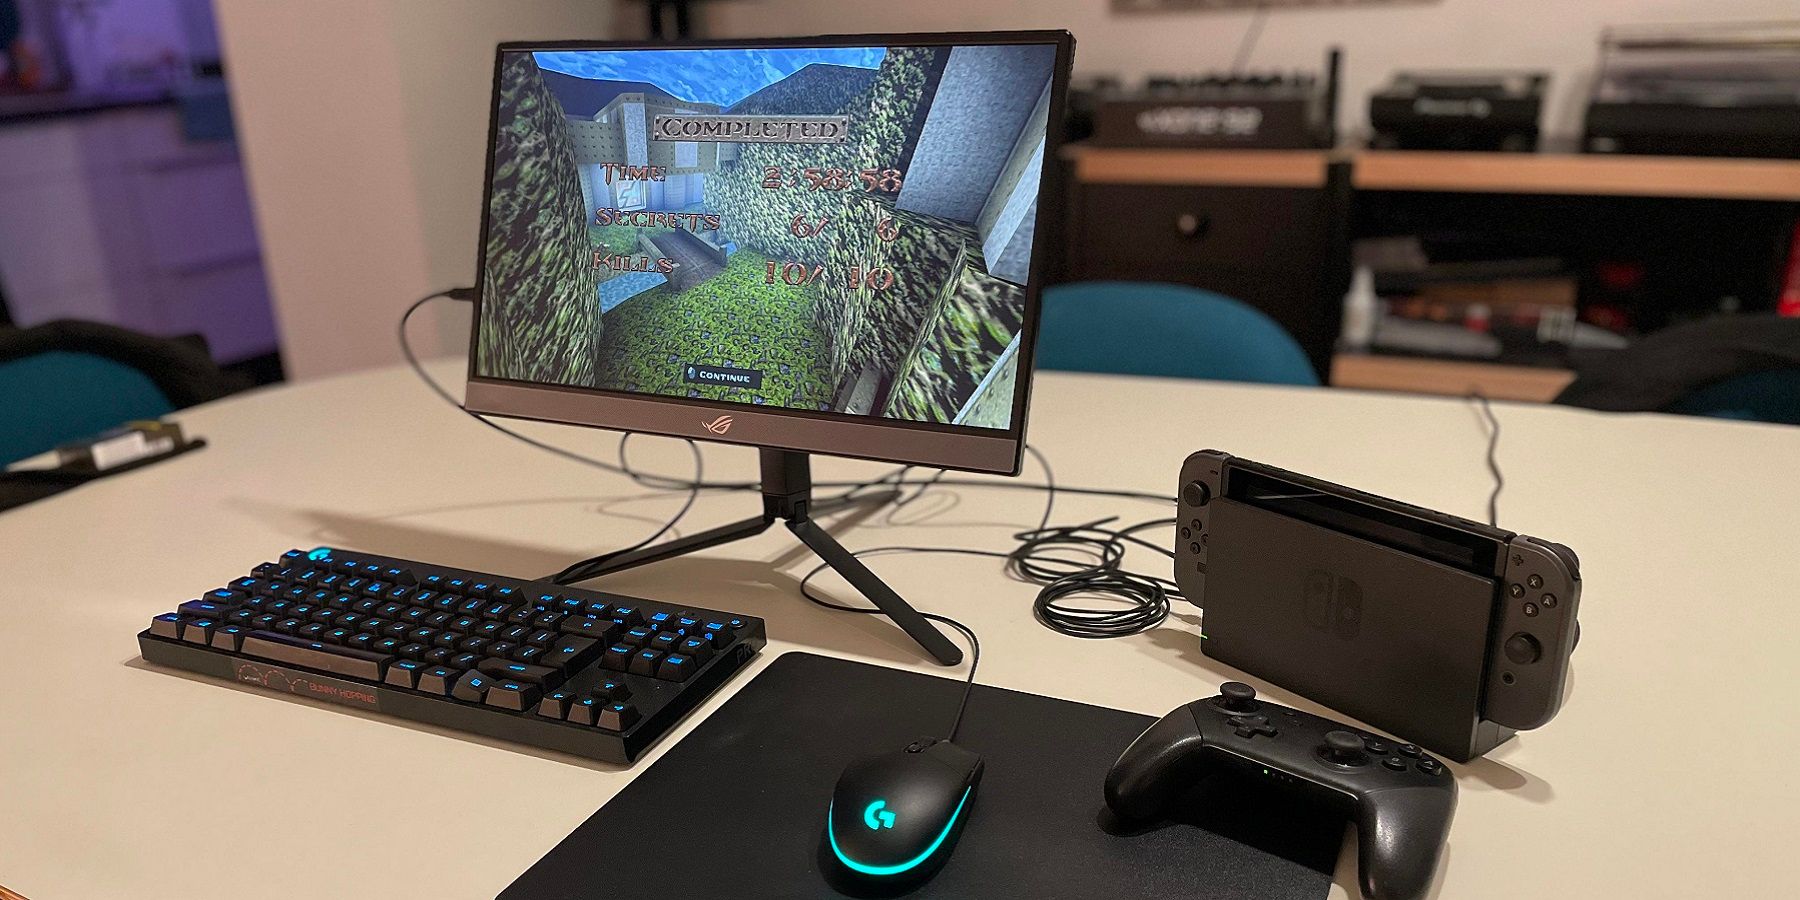 A photo of a Nintendo Switch hooked up to a mouse and keyboard, with a monitor showing a screenshot from Quake.